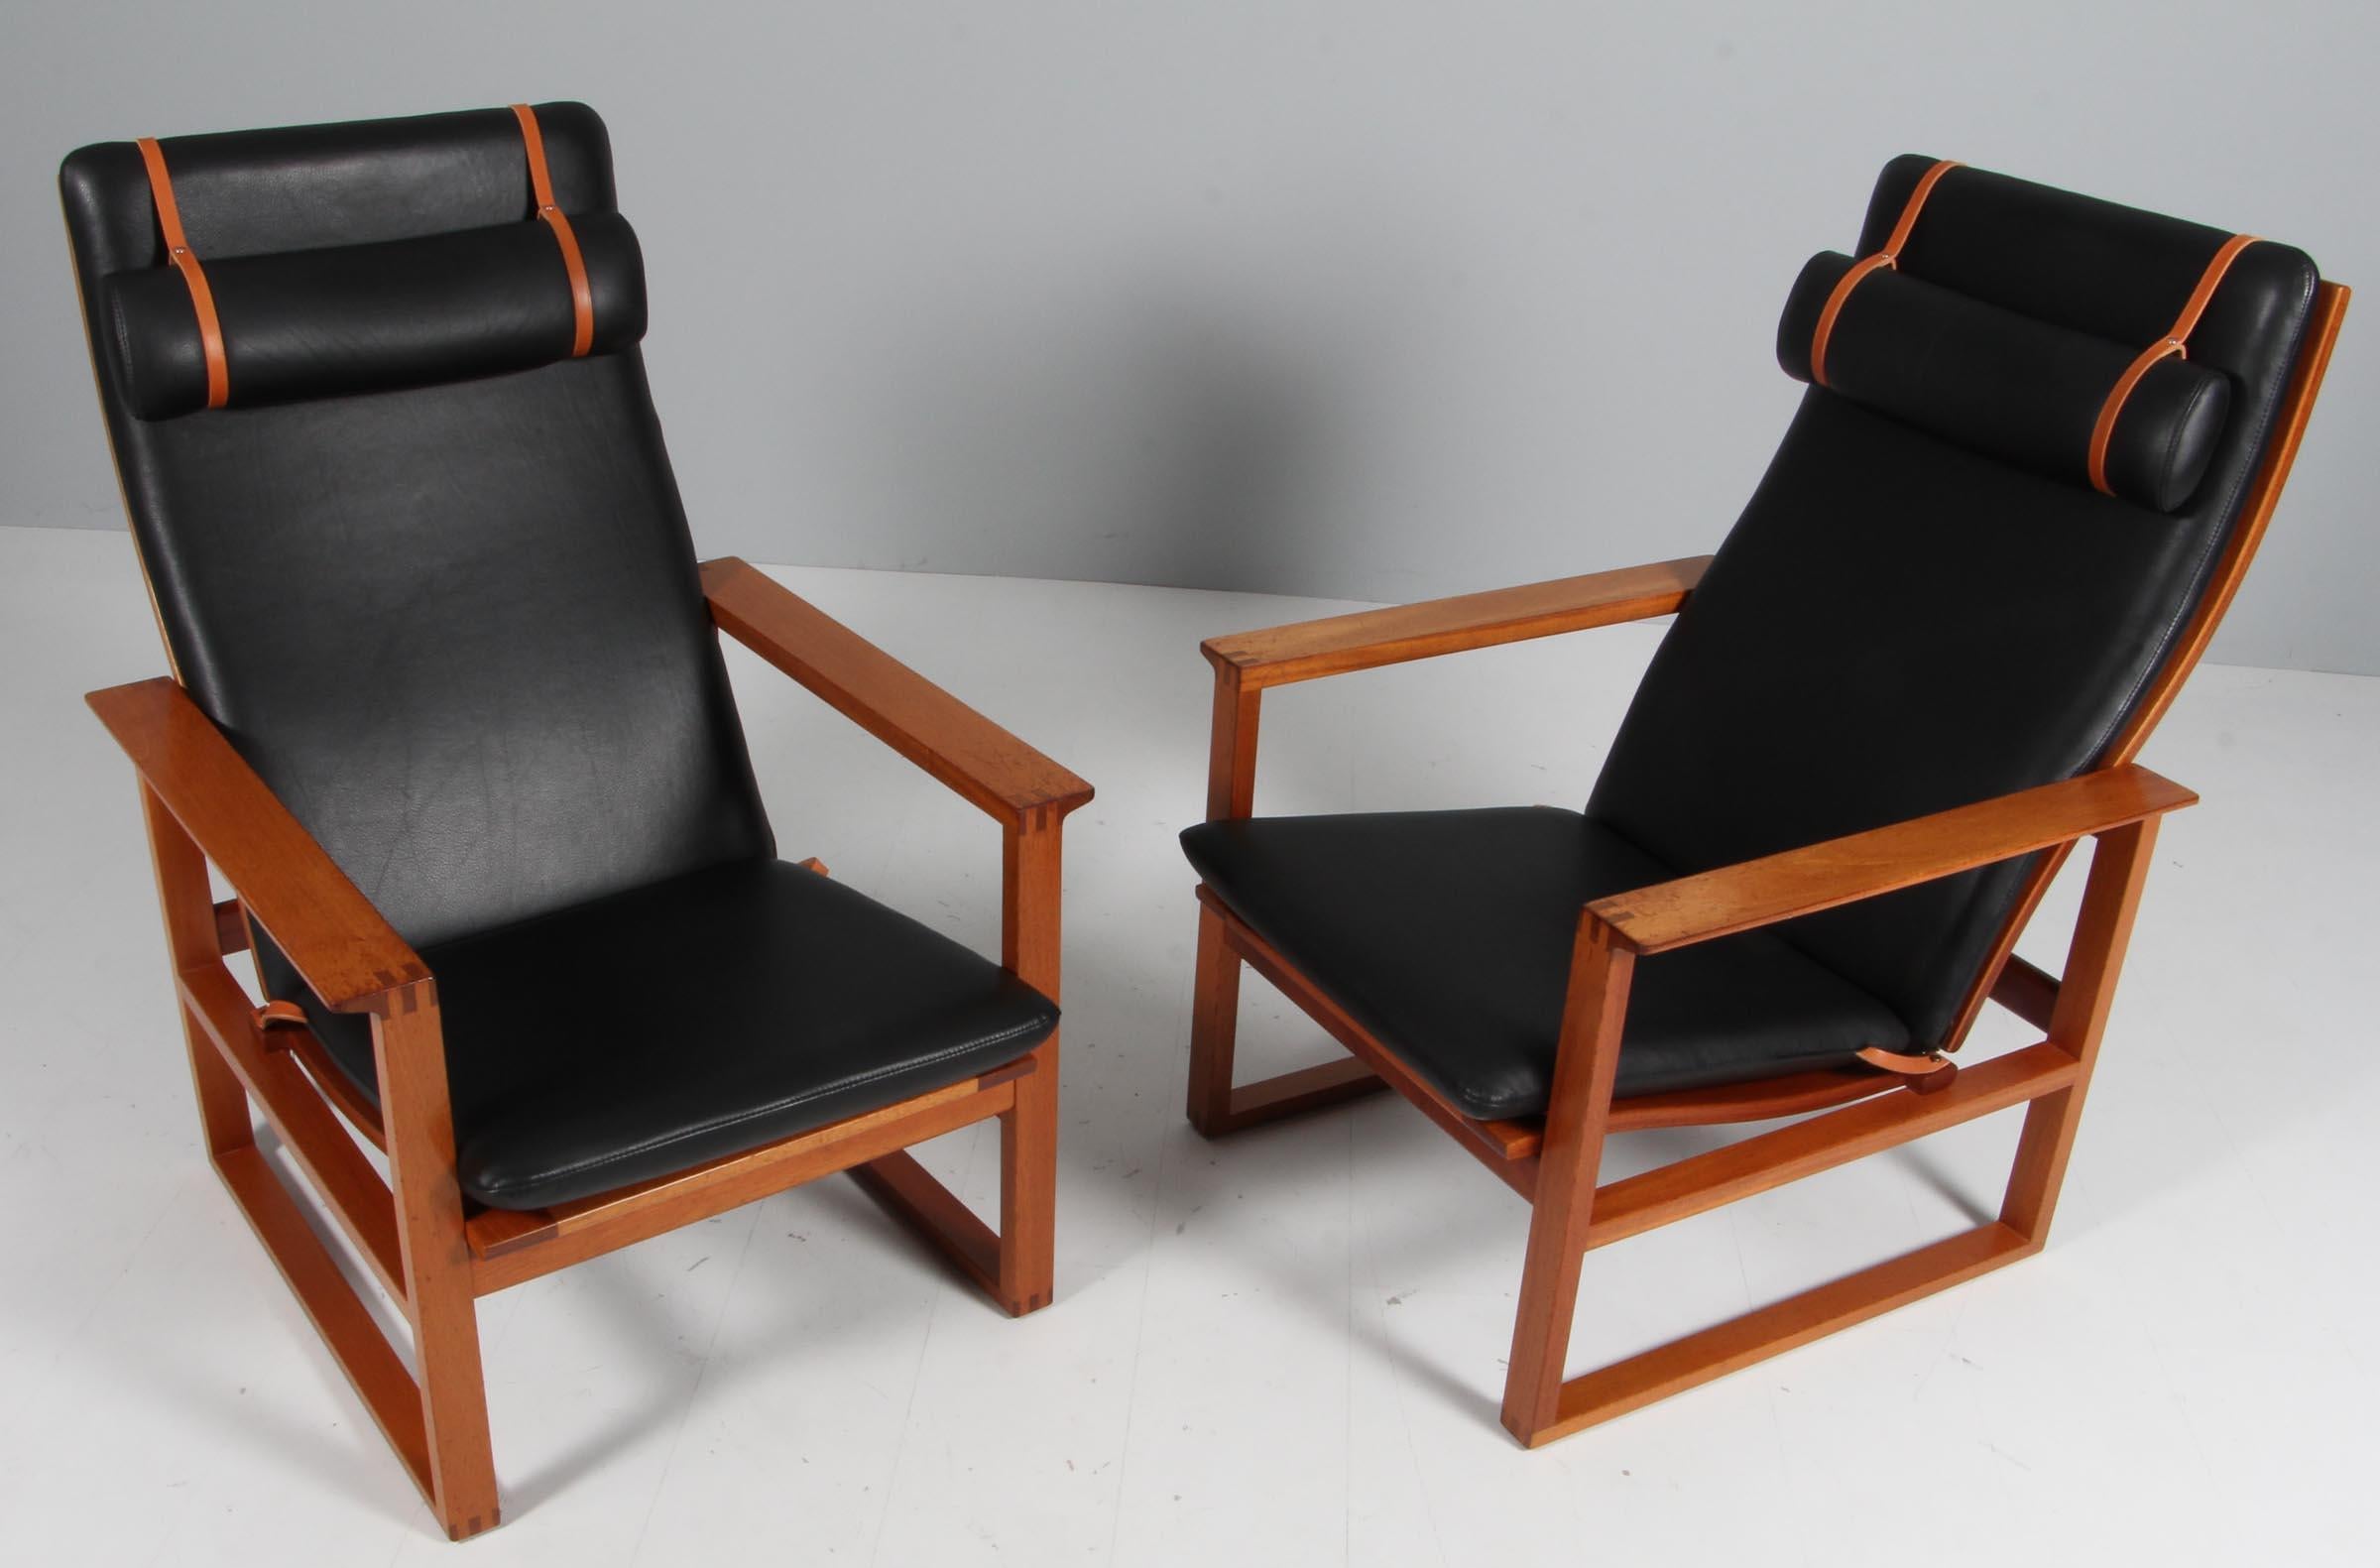 A Børge Mogensen lounge chairs designed in 1956 model number 2254 for Fredericia Stolefabrik. Cubical frames made of solid mahogany with finger joints and cane. 

Reupholstered in black leather. The seat cushion can be fixed with a leather strap